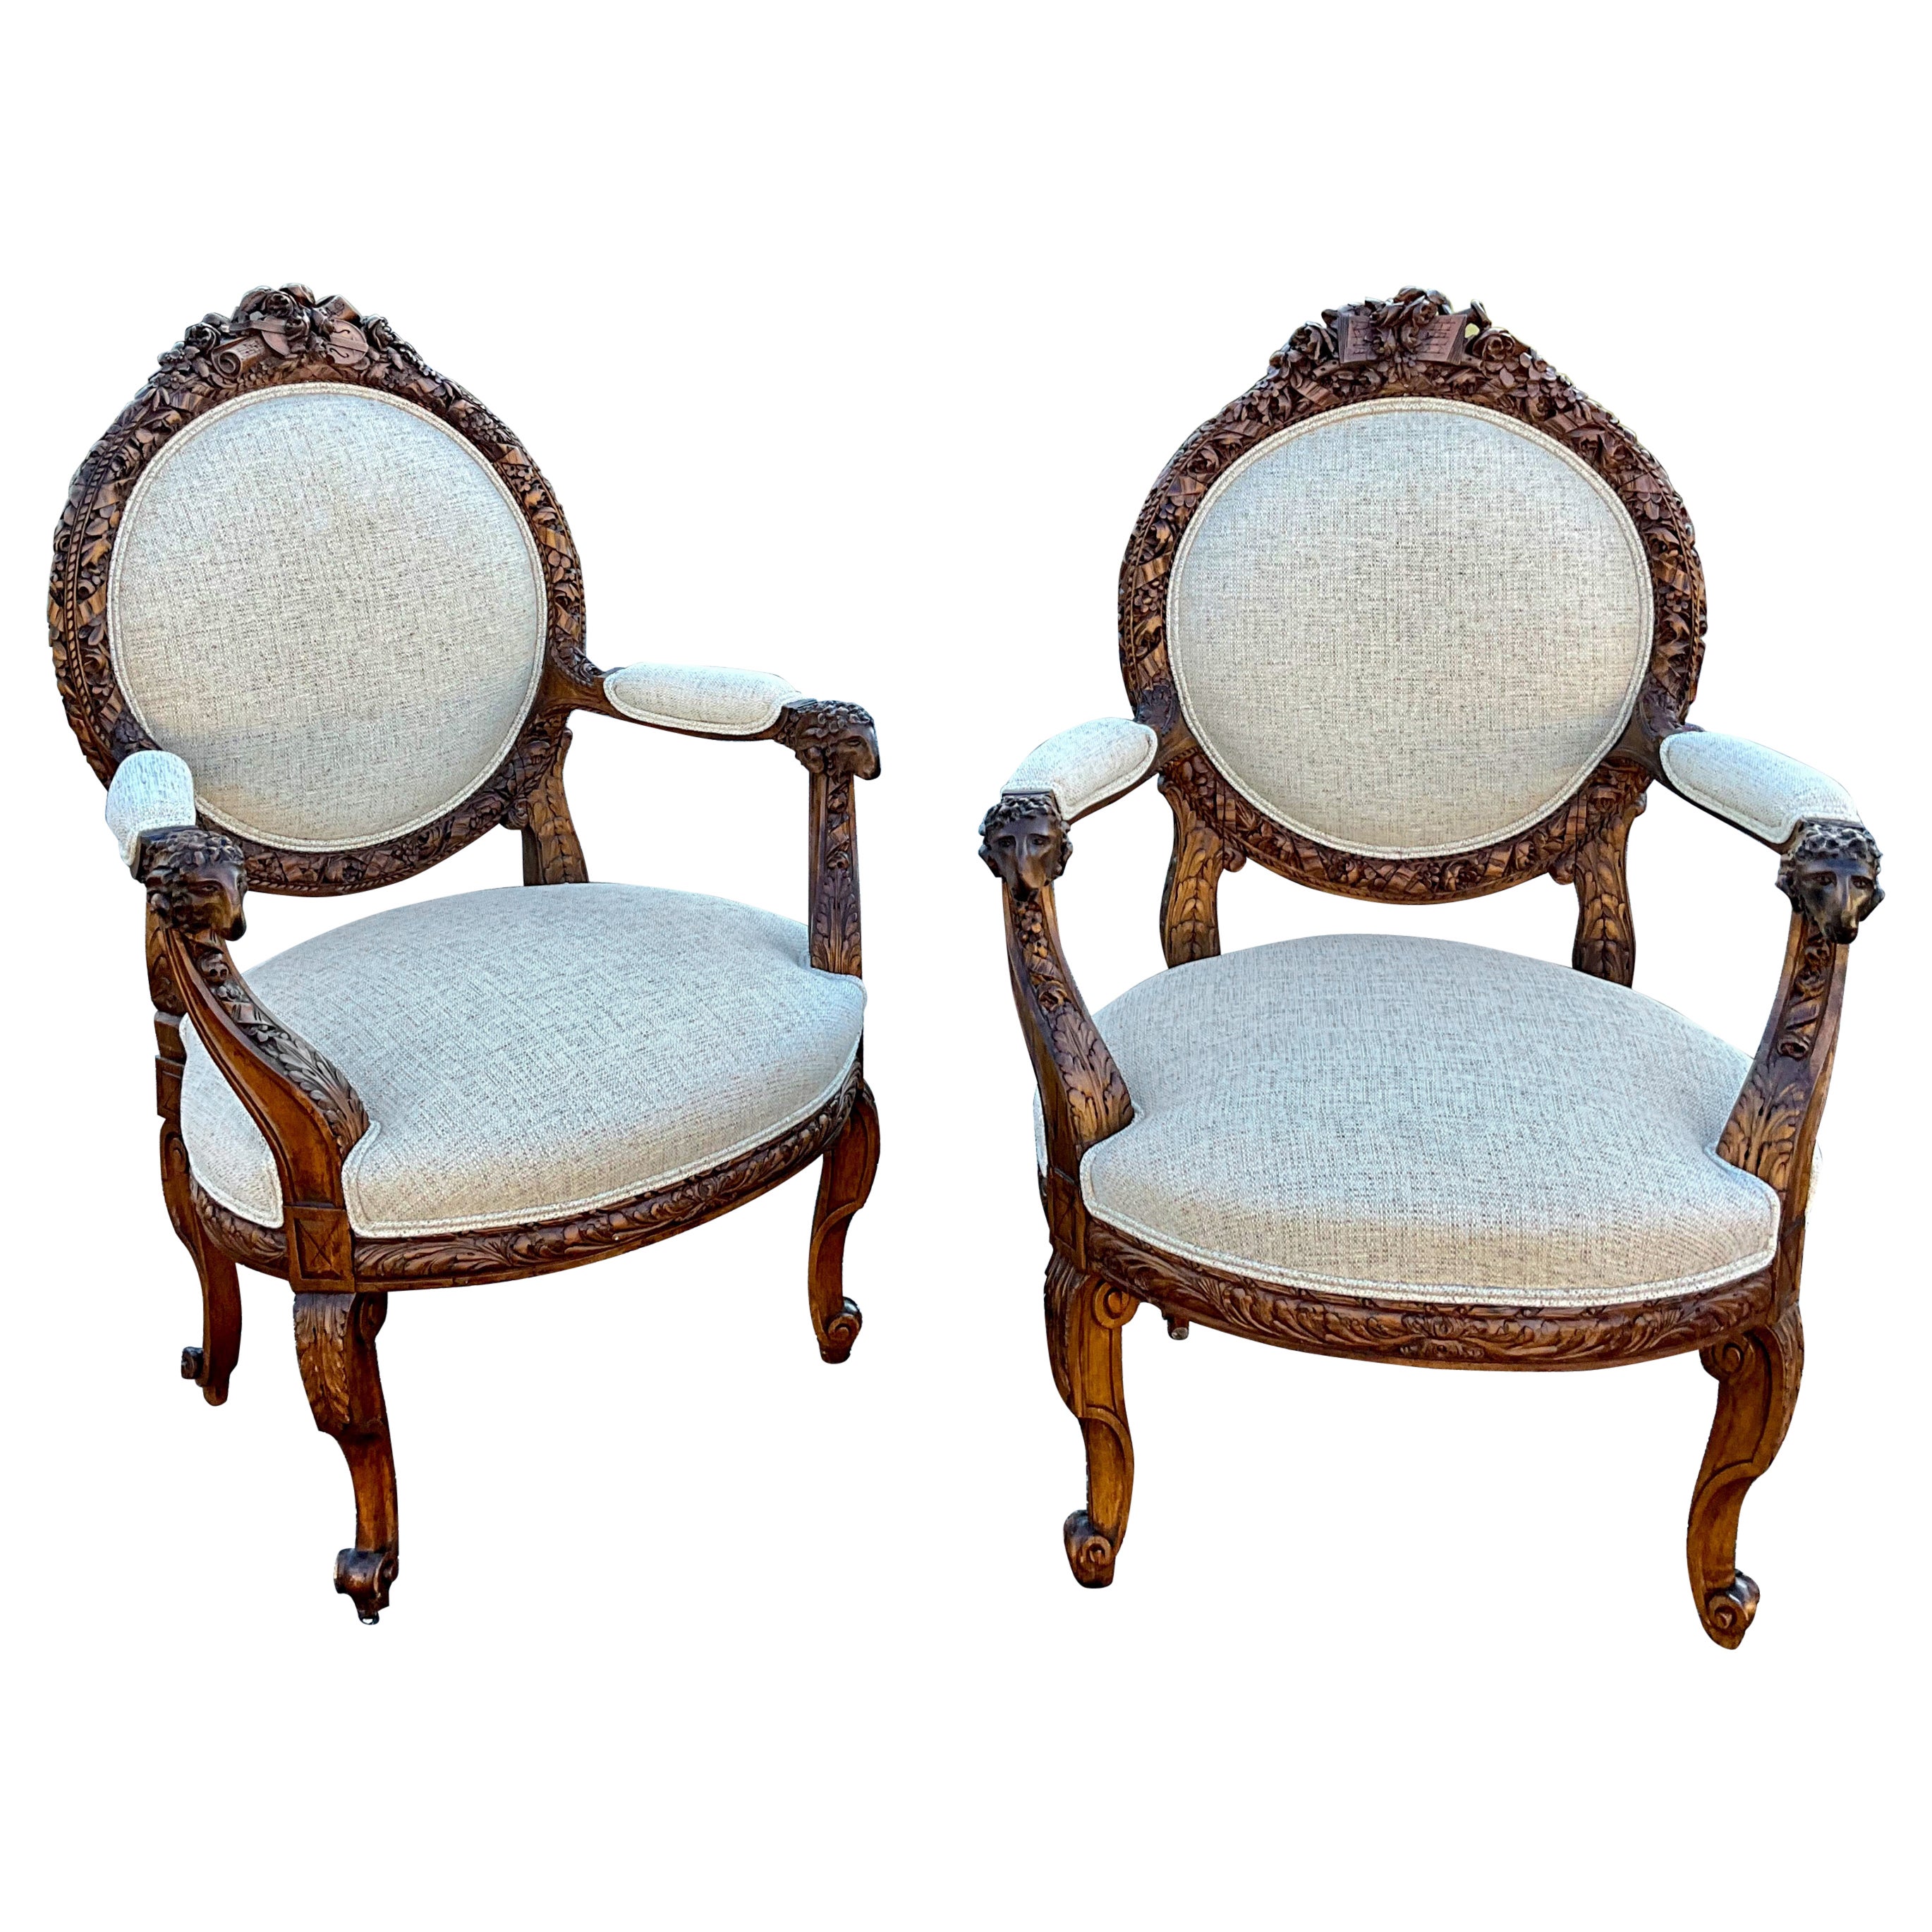 19th-C. French Neo-Classical Carved Walnut Bergere Chairs with Rams, Pair For Sale